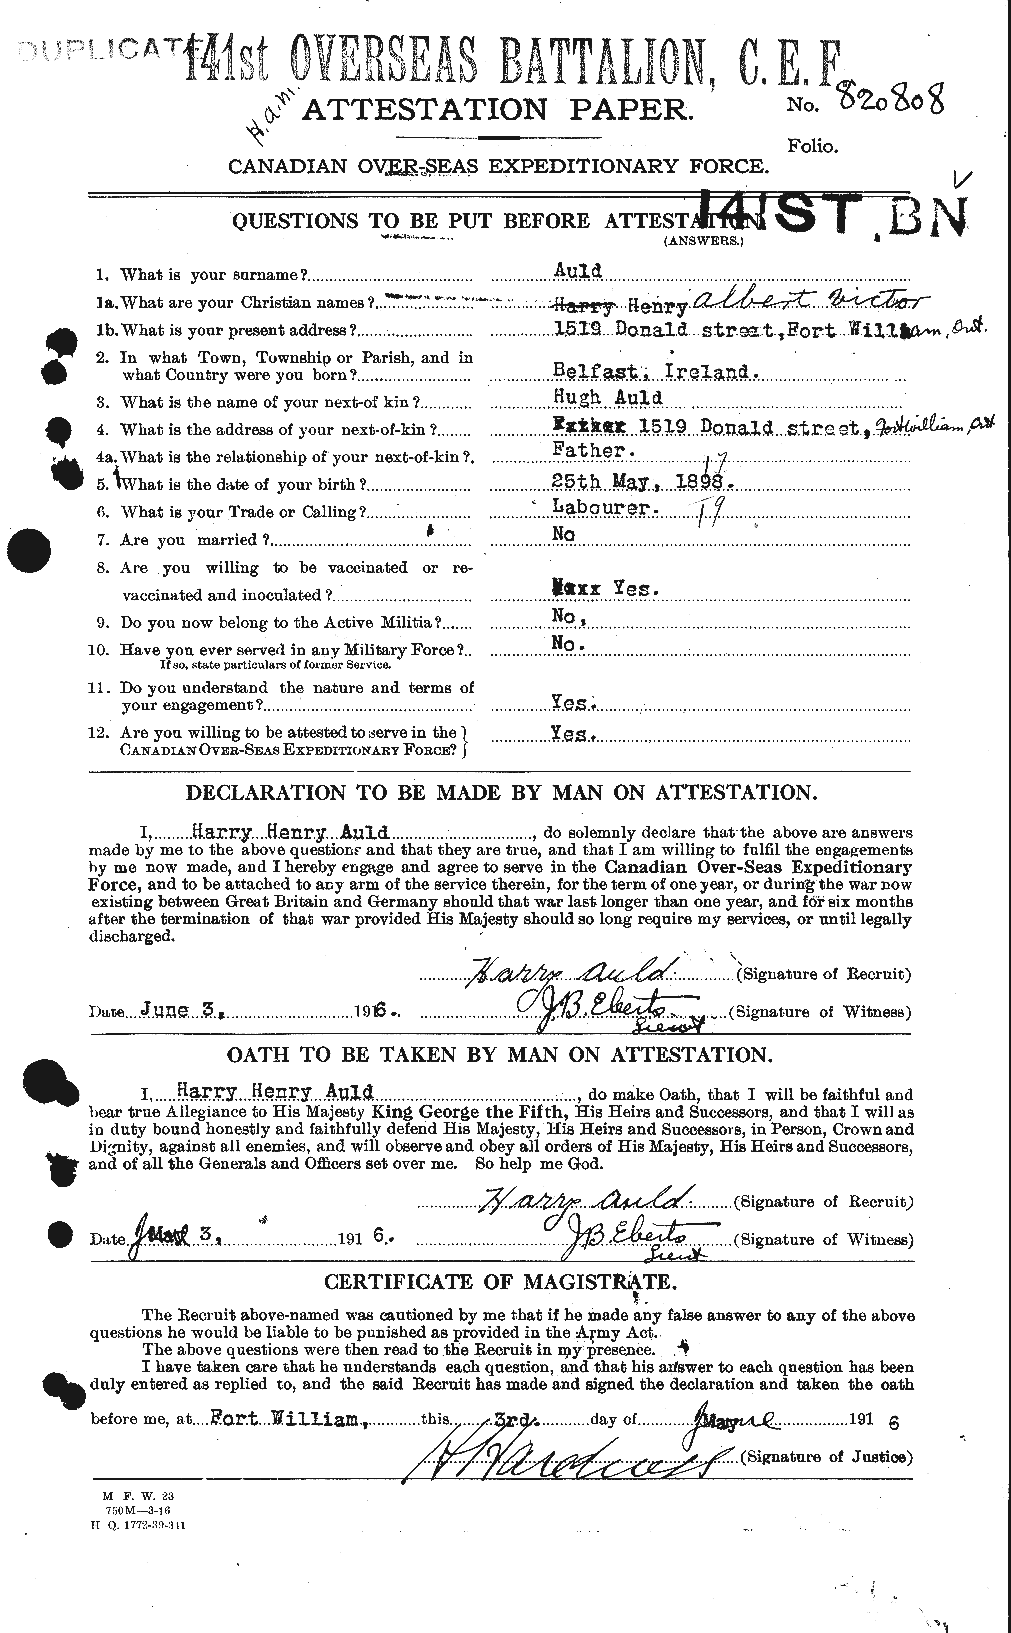 Personnel Records of the First World War - CEF 224275a